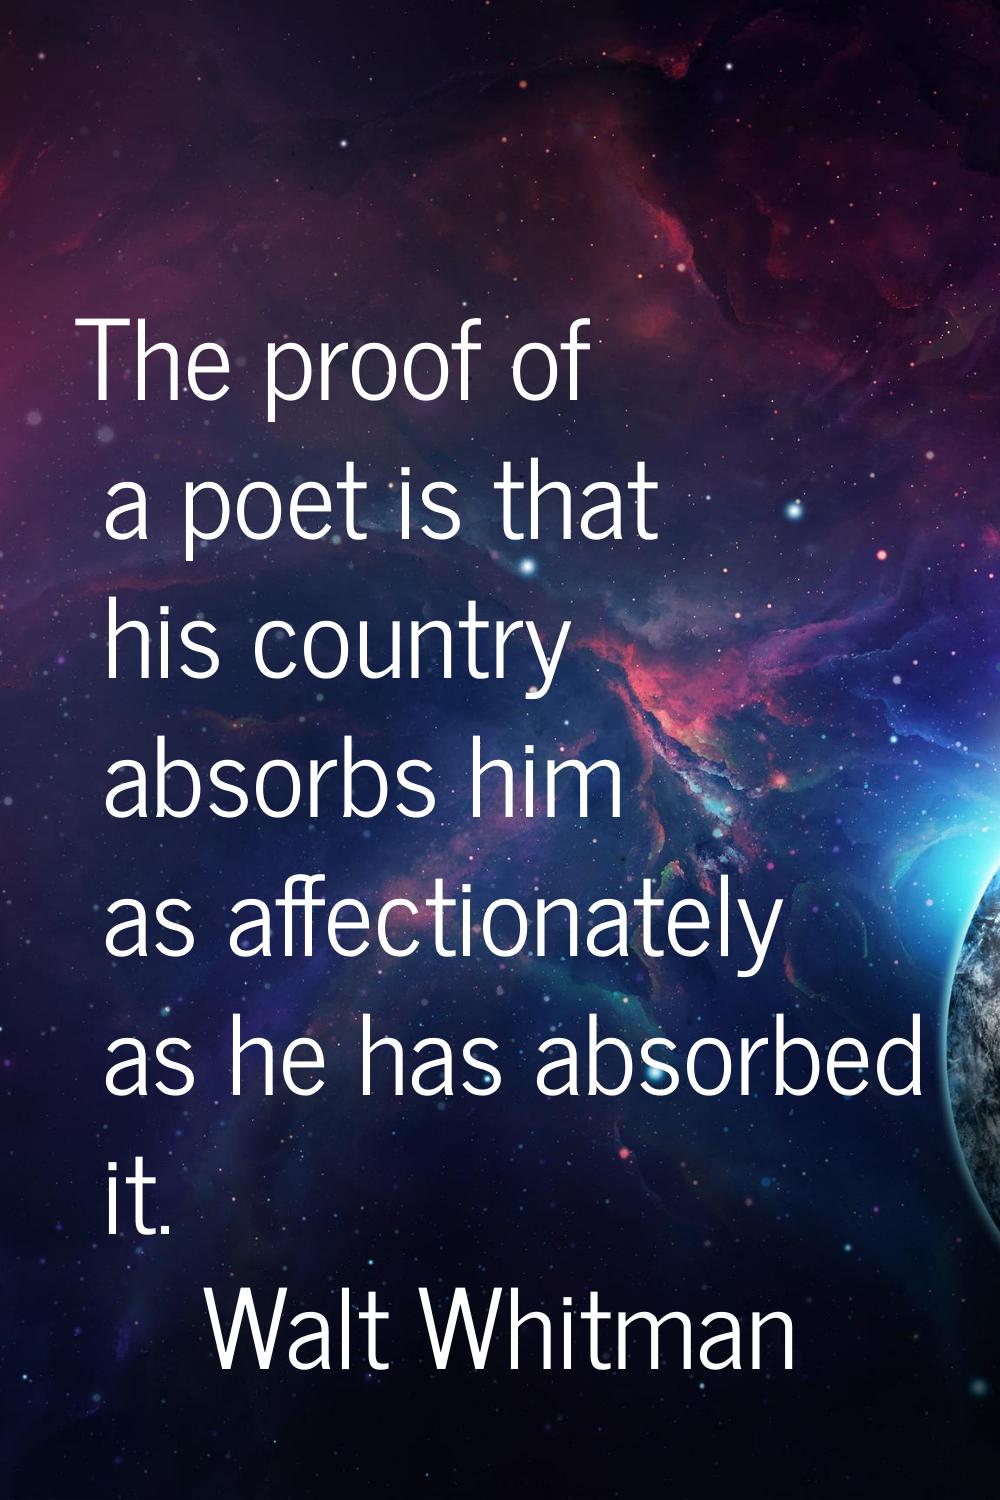 The proof of a poet is that his country absorbs him as affectionately as he has absorbed it.